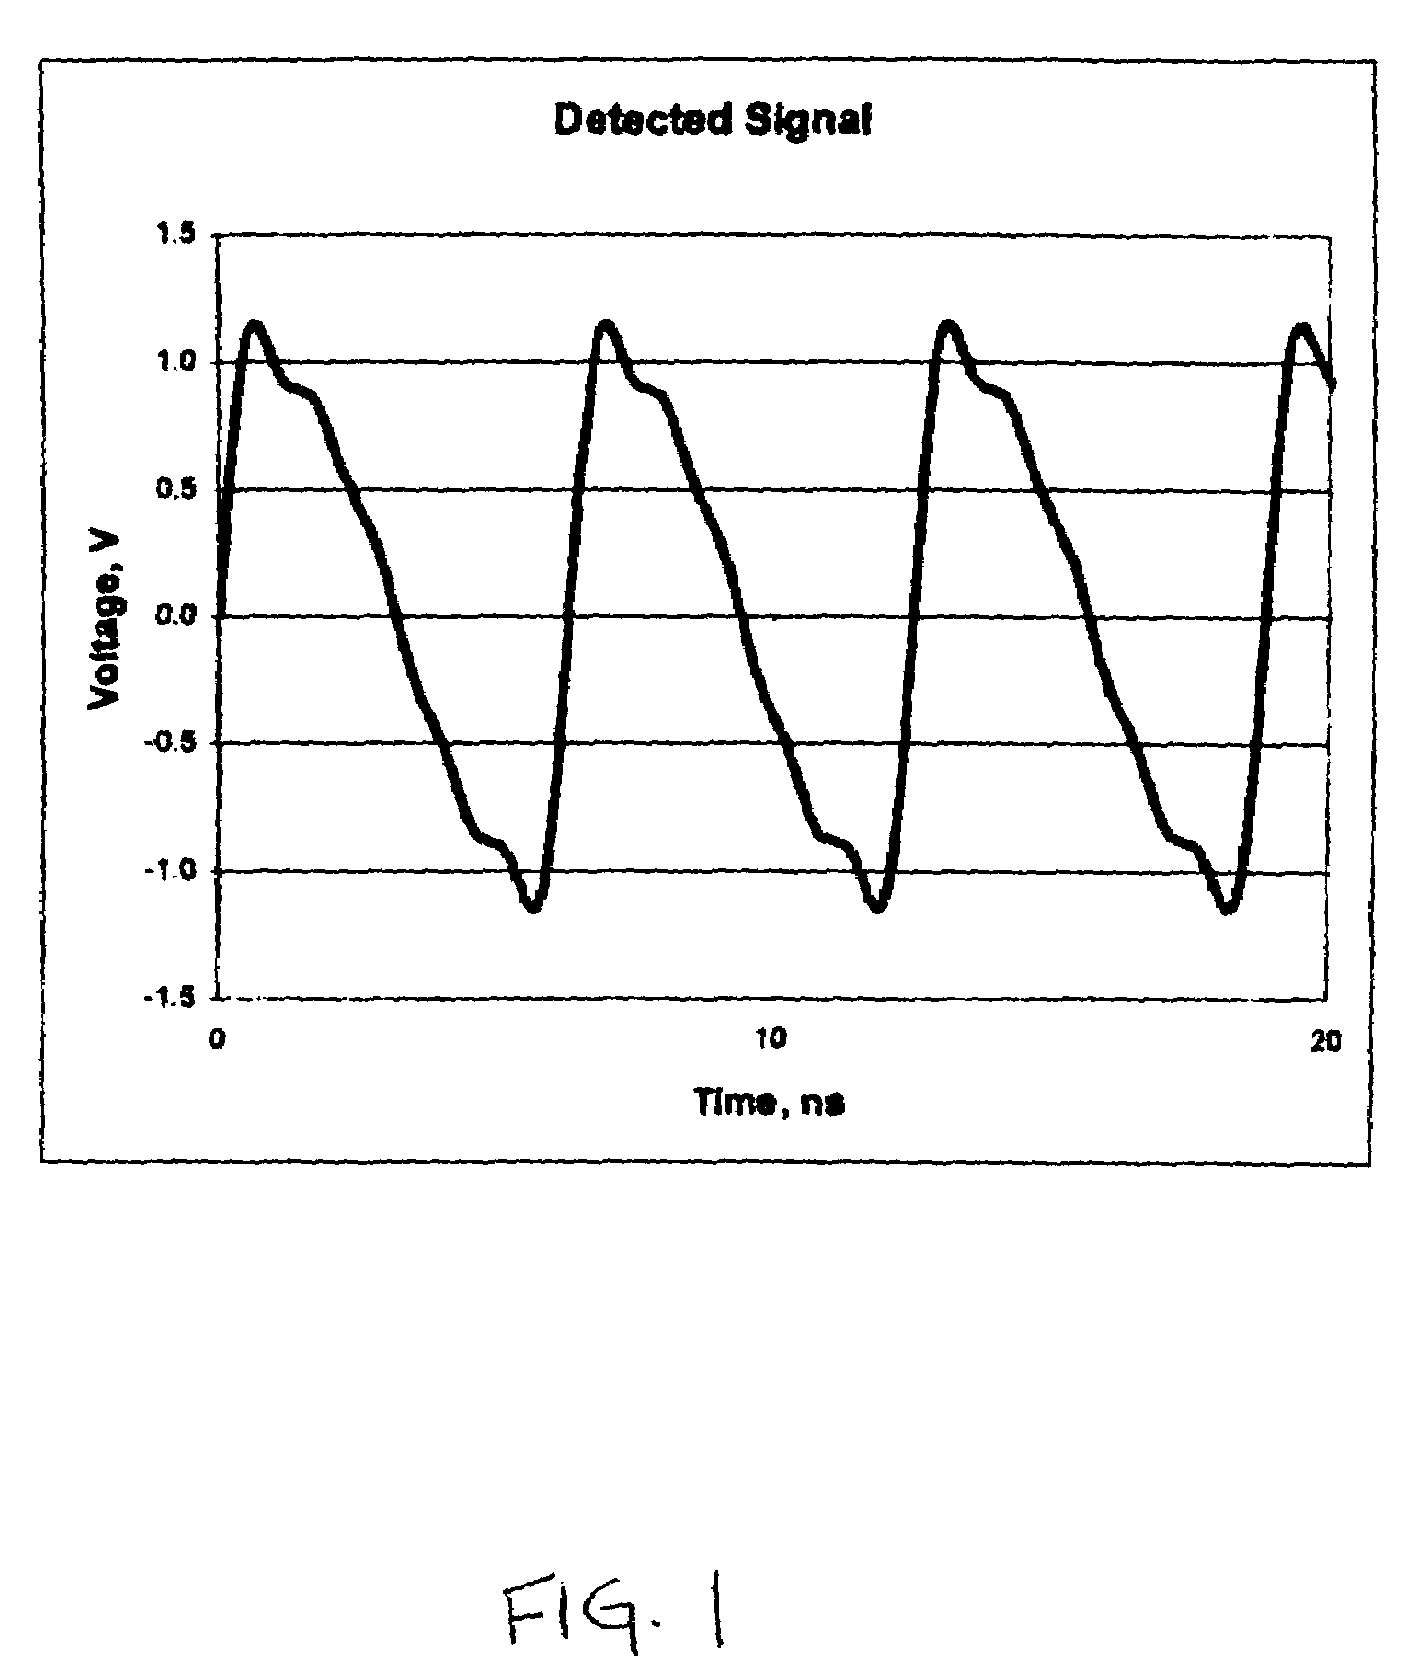 Method of detecting RF powder delivered to a load and complex impedance of the load